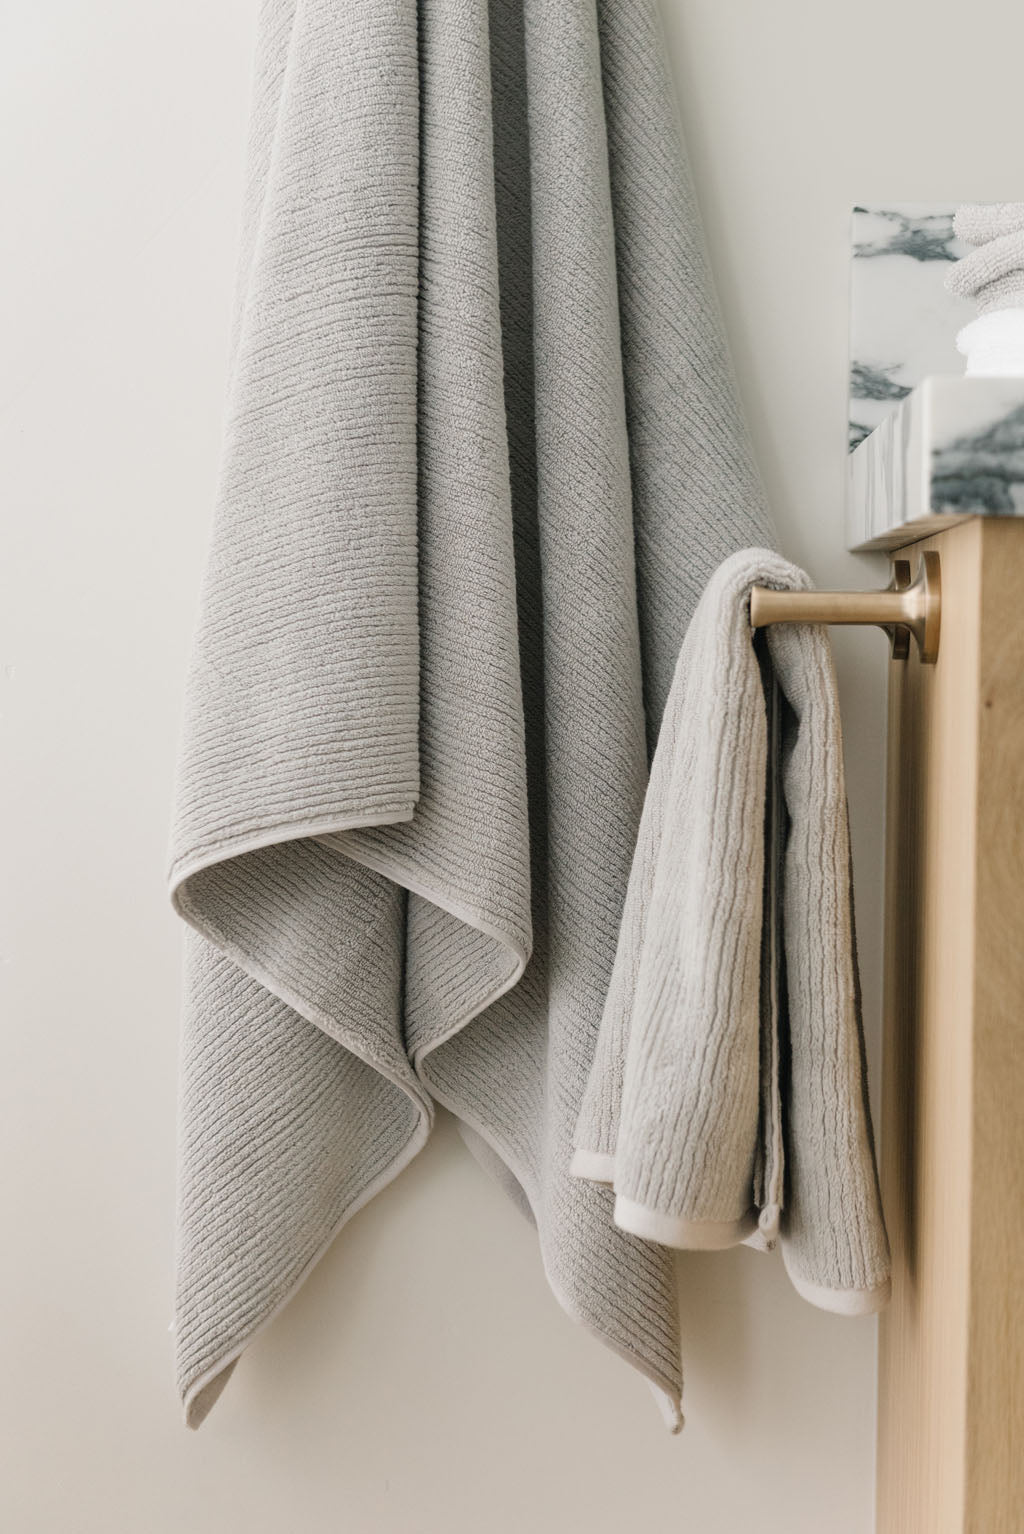 Ribbed Terry Hand Towels in the color Light Grey. Photo of product taken with the product draped over a towel bar on the side of a white marble sink. 